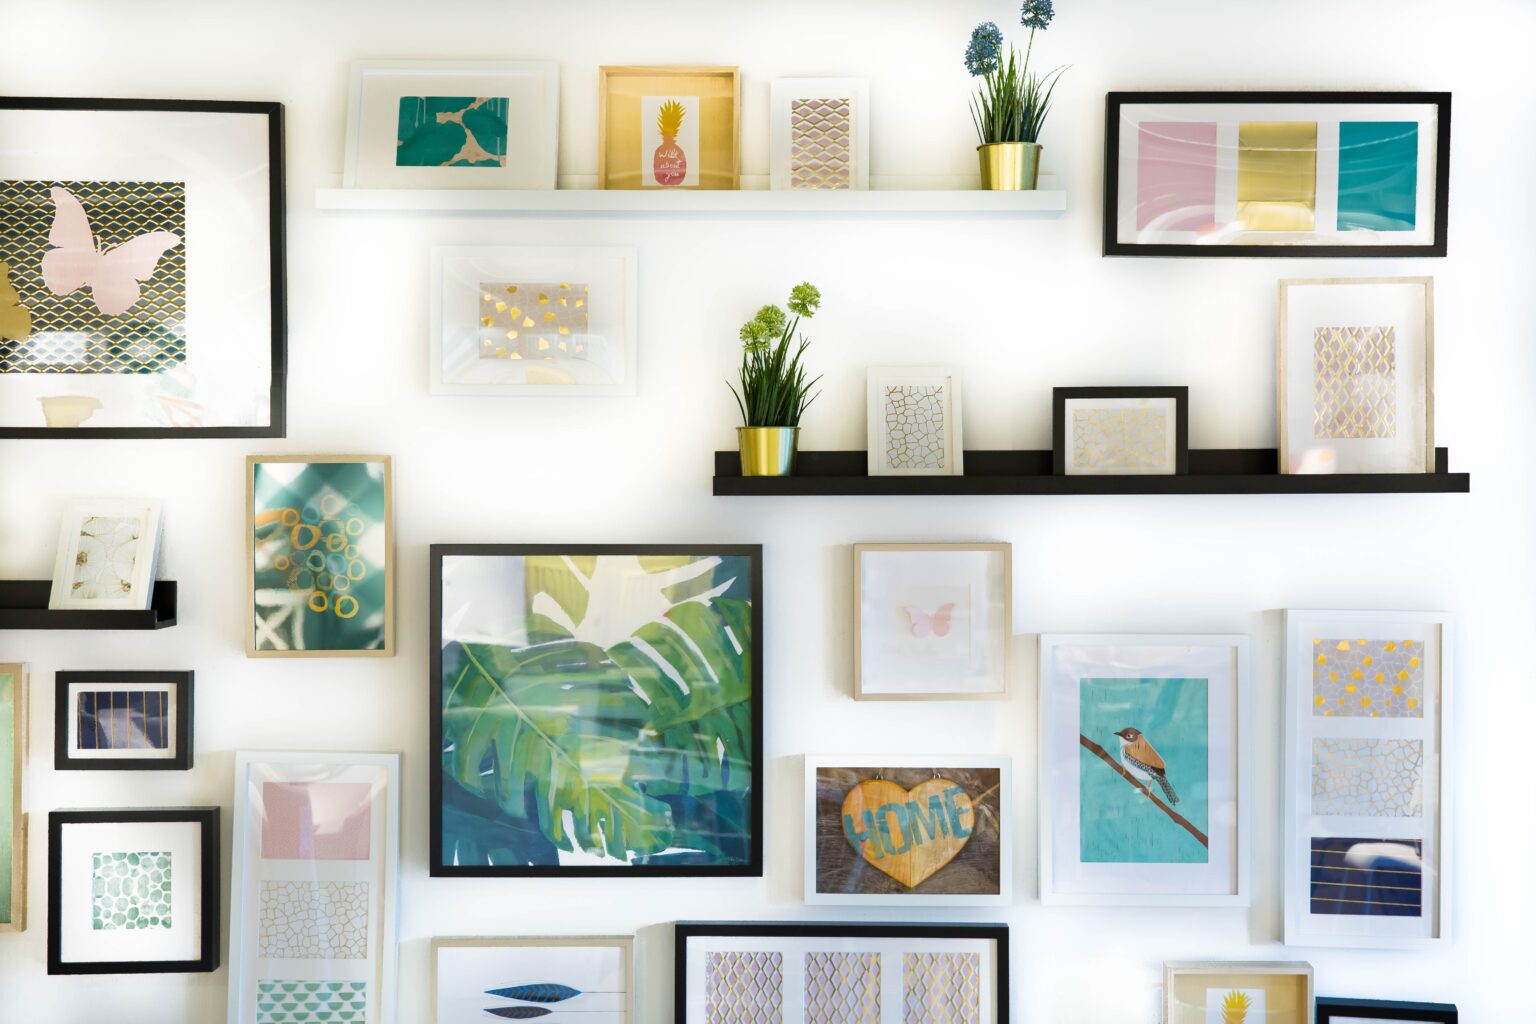 5 Steps to Creating a Beautiful Gallery Wall in Your Home